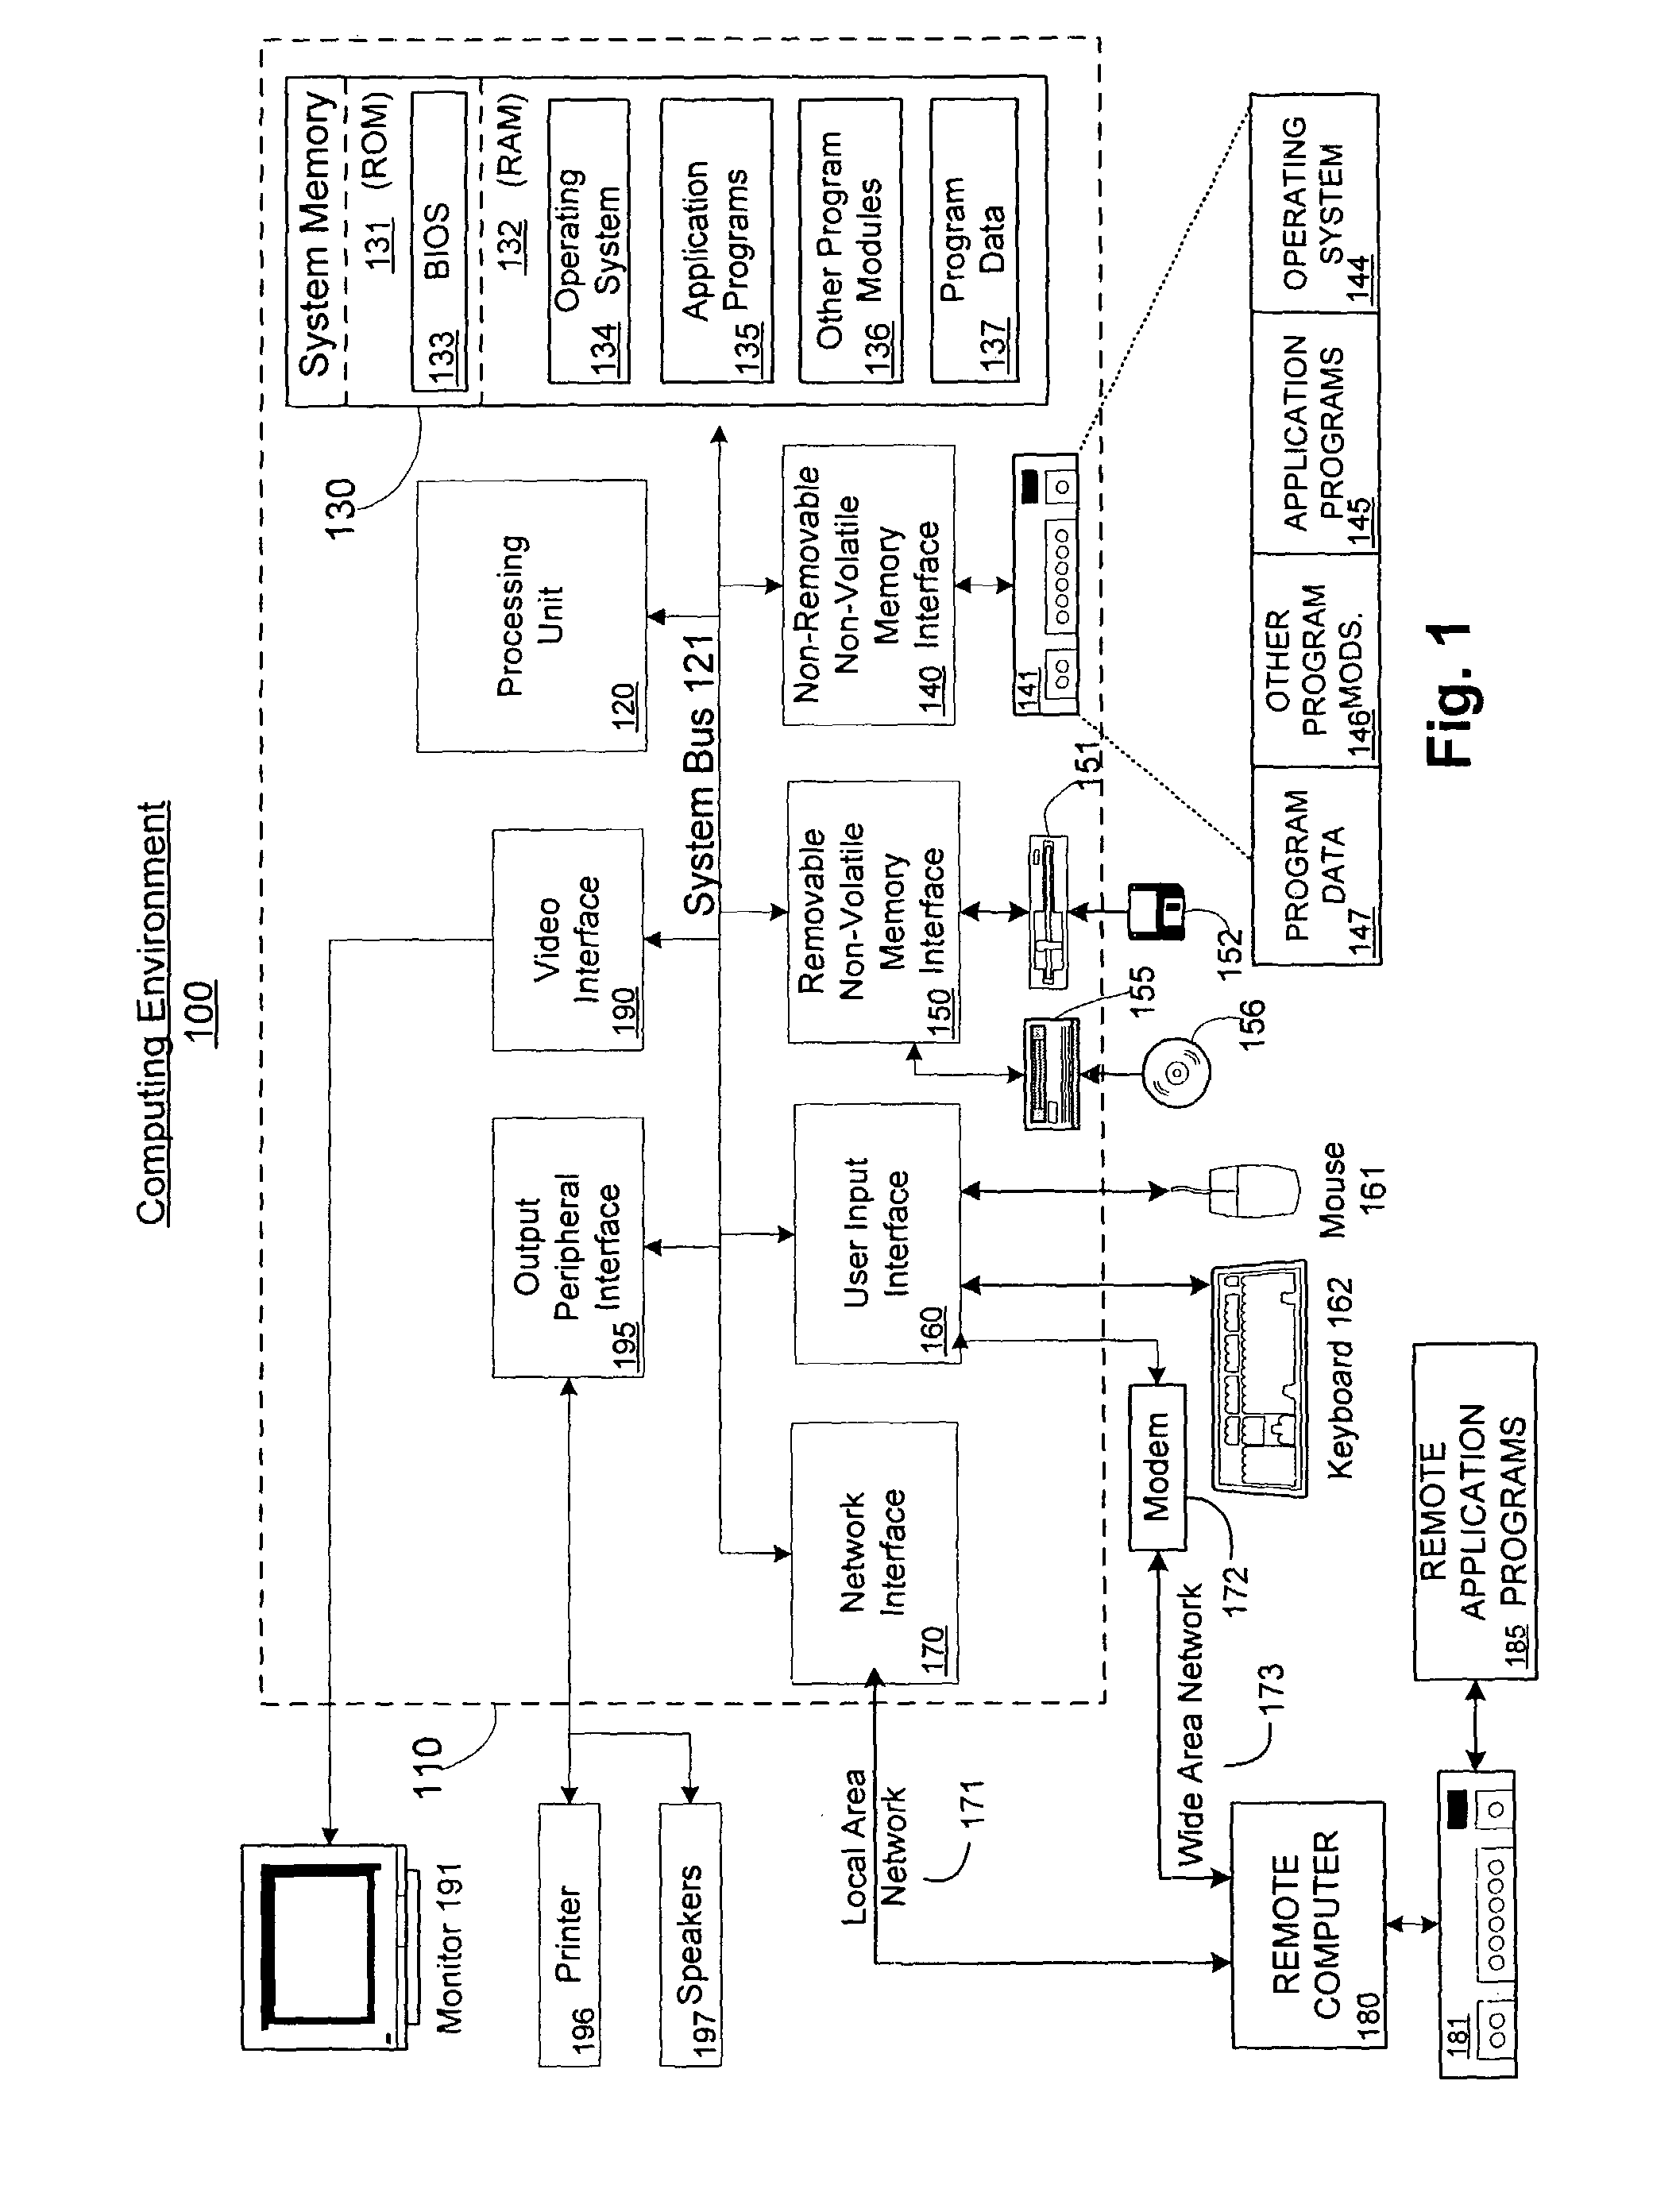 Automatic task generator method and system